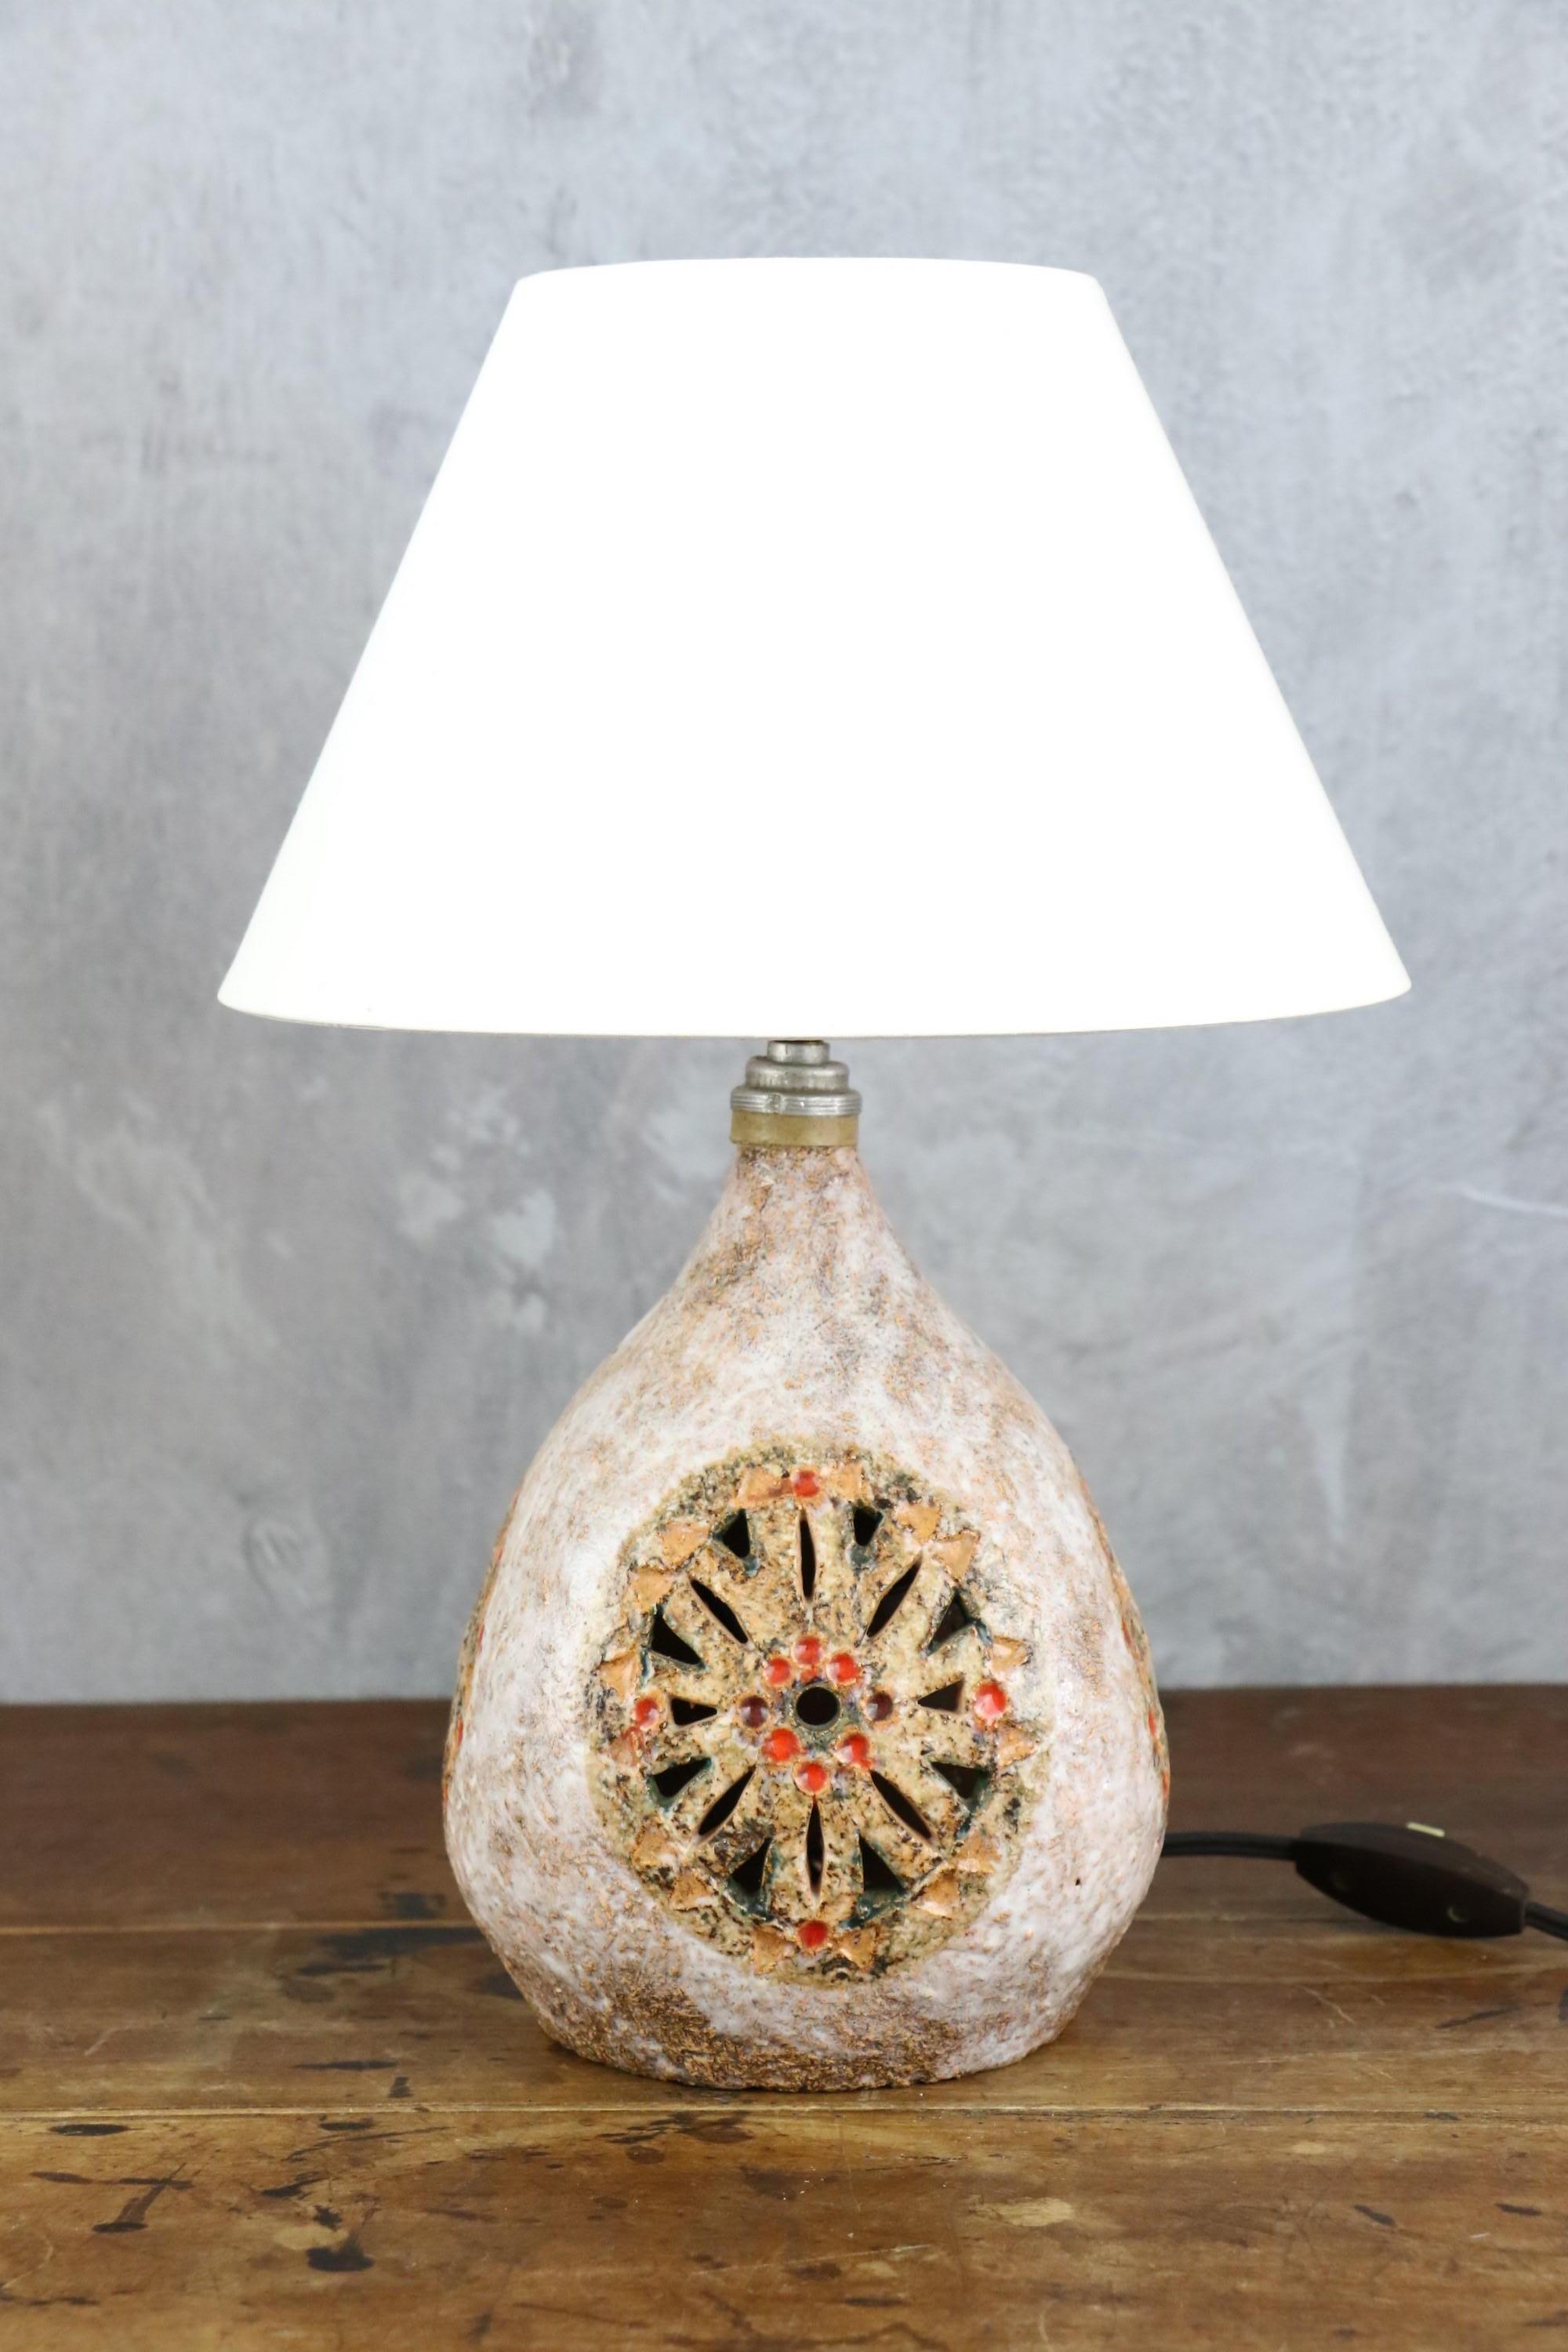 Glazed ceramic lamp by Raphaël Giarusso, 1960, Era Georges Pelletier

Beautiful ceramic lamp, with a pinkish glaze and rosette decorations typical of Raphaël Giarusso's creations. 
A great friend of Georges Pelletier, he founded the Rebeval workshop